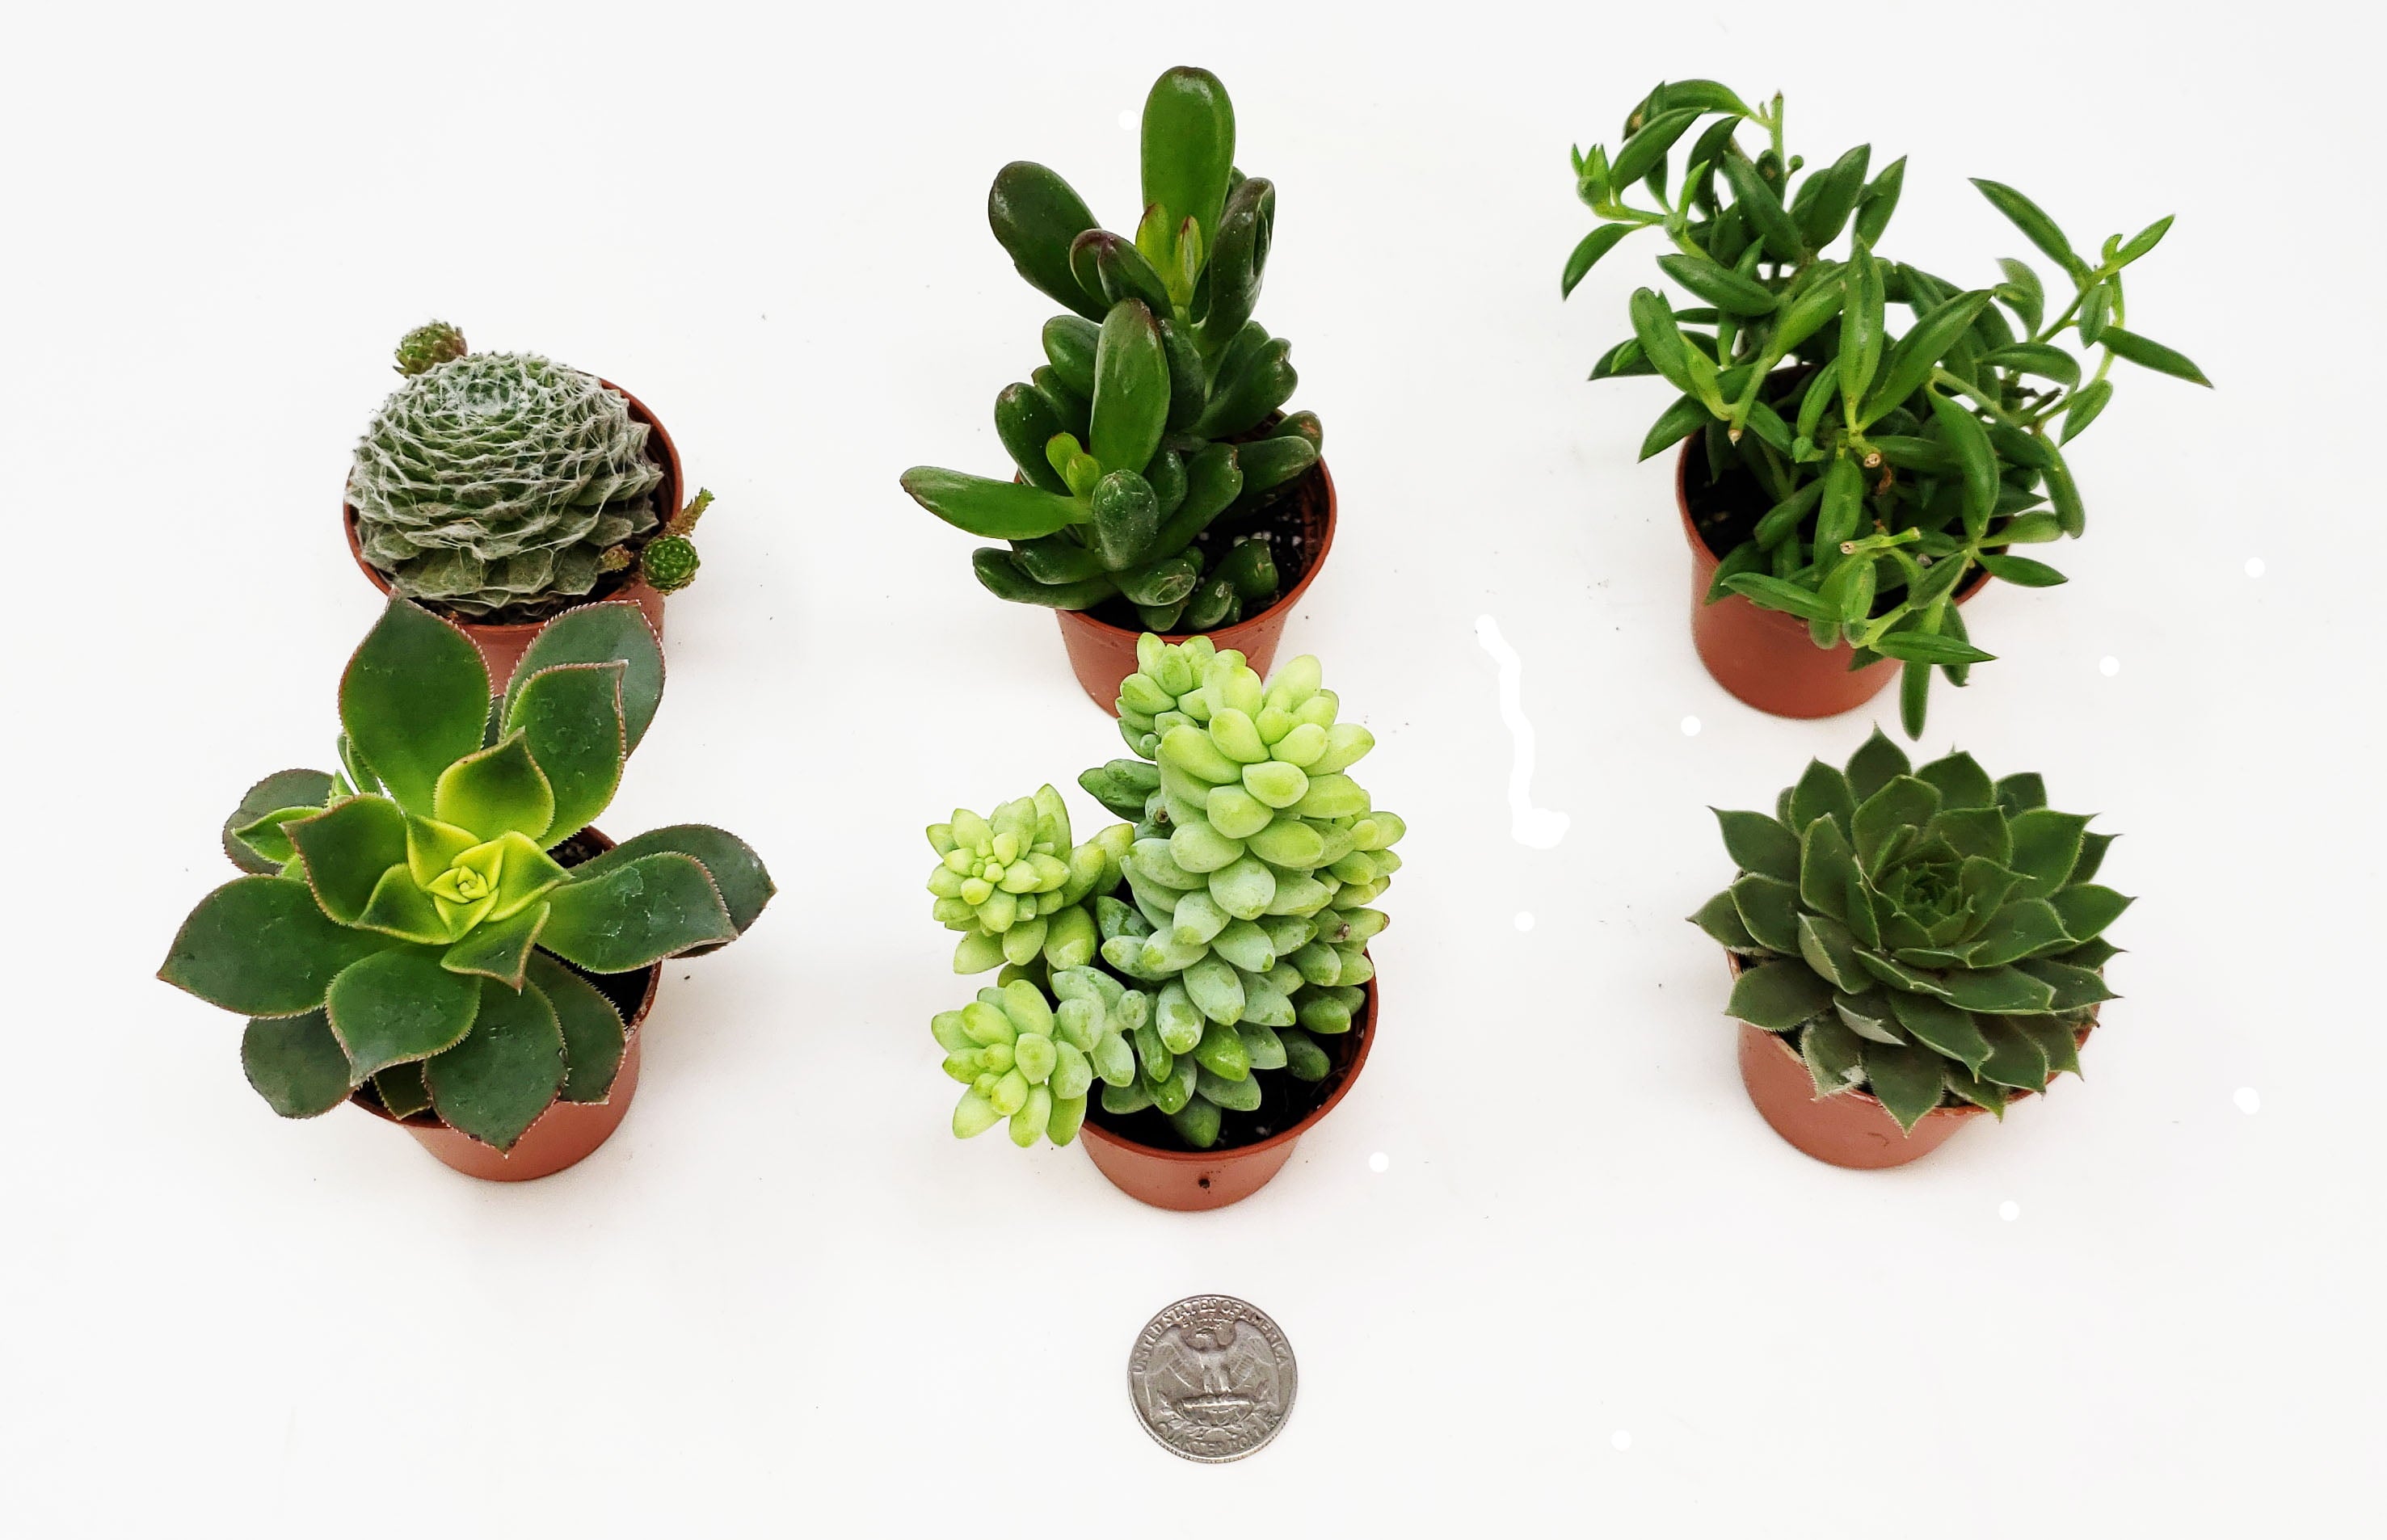 9GreenBox 6-Pack Succulents - Choose from 10 Types of Real and Hand-Picked Succulent Plants in Mini Pots - Home and Office Desks， Shelves， Windowsill Decor - Great Wedding， Birthday， Christmas Gift